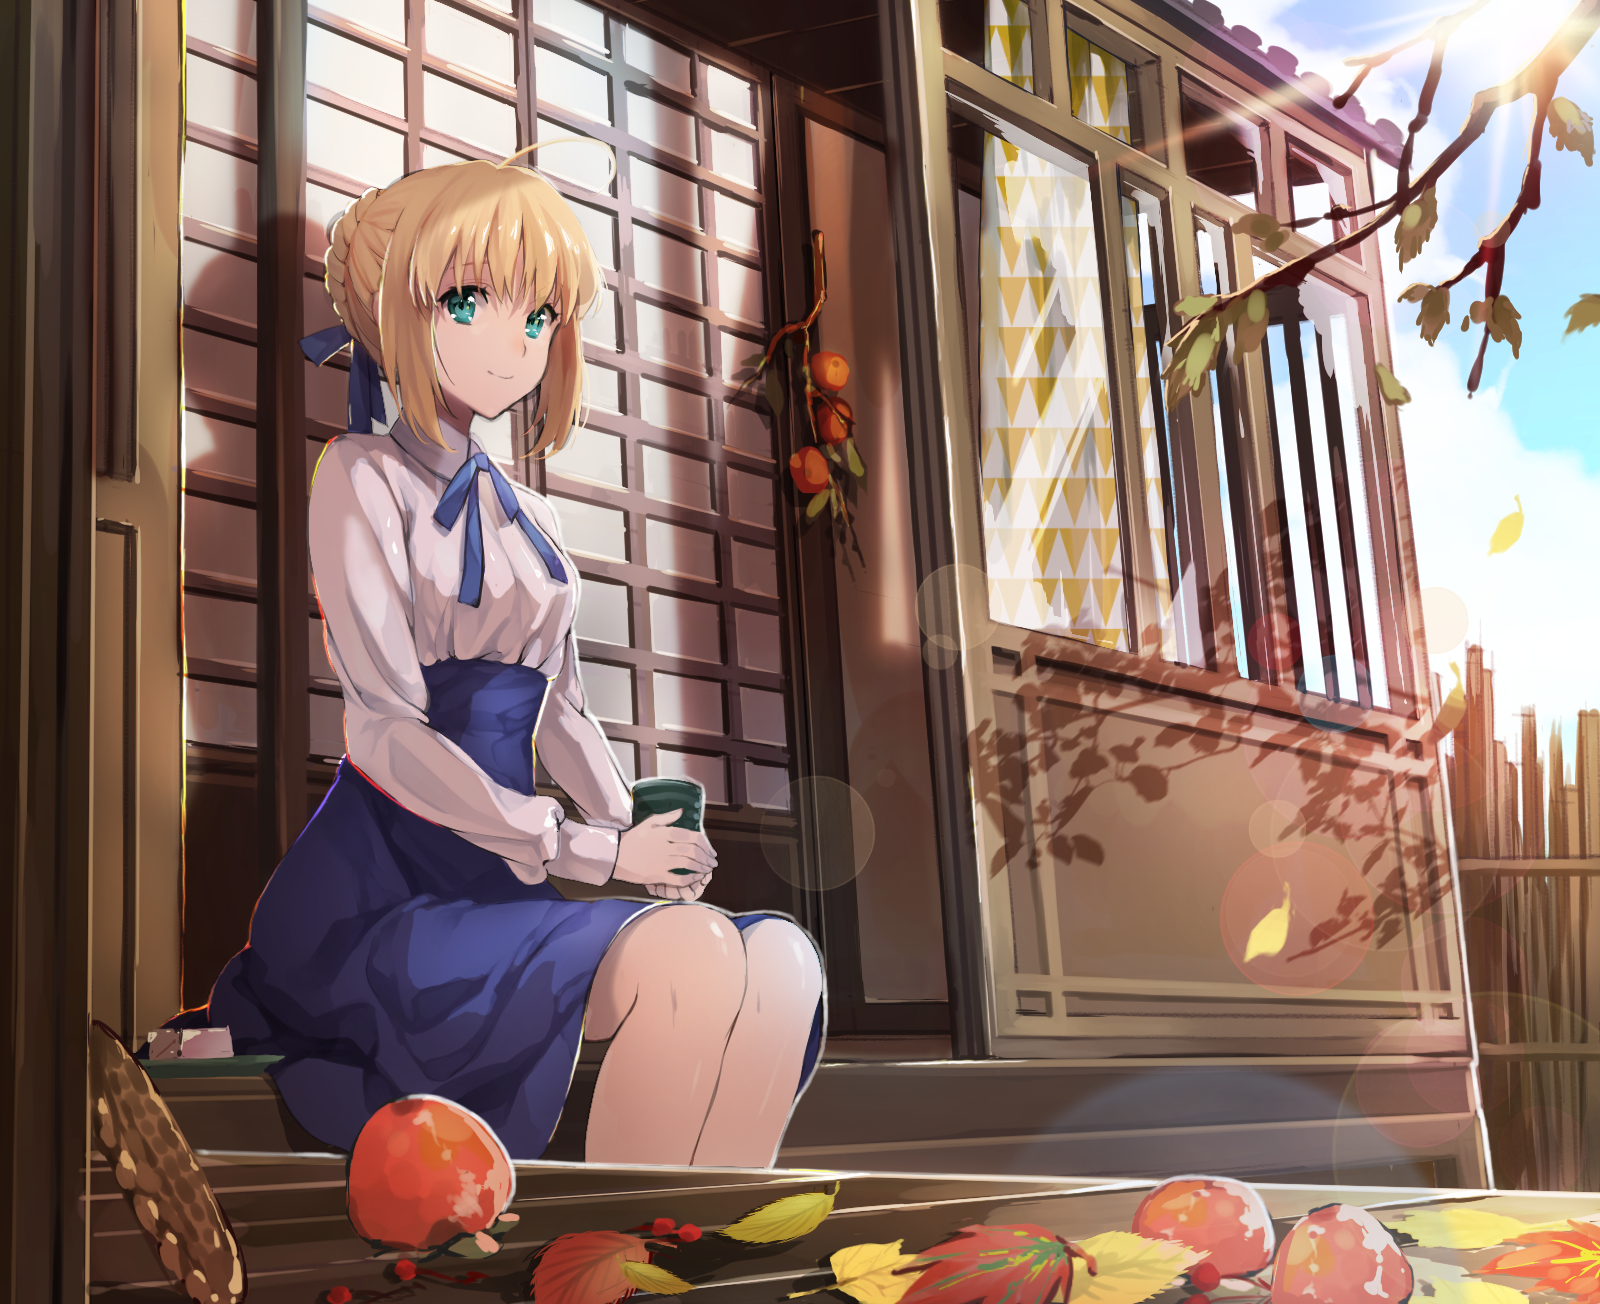 Fate Series Fate Stay Night Fall Sunset Blue Skirt Long Hair Blond Hair Anime Girls Tea Time Smiling 1600x1304